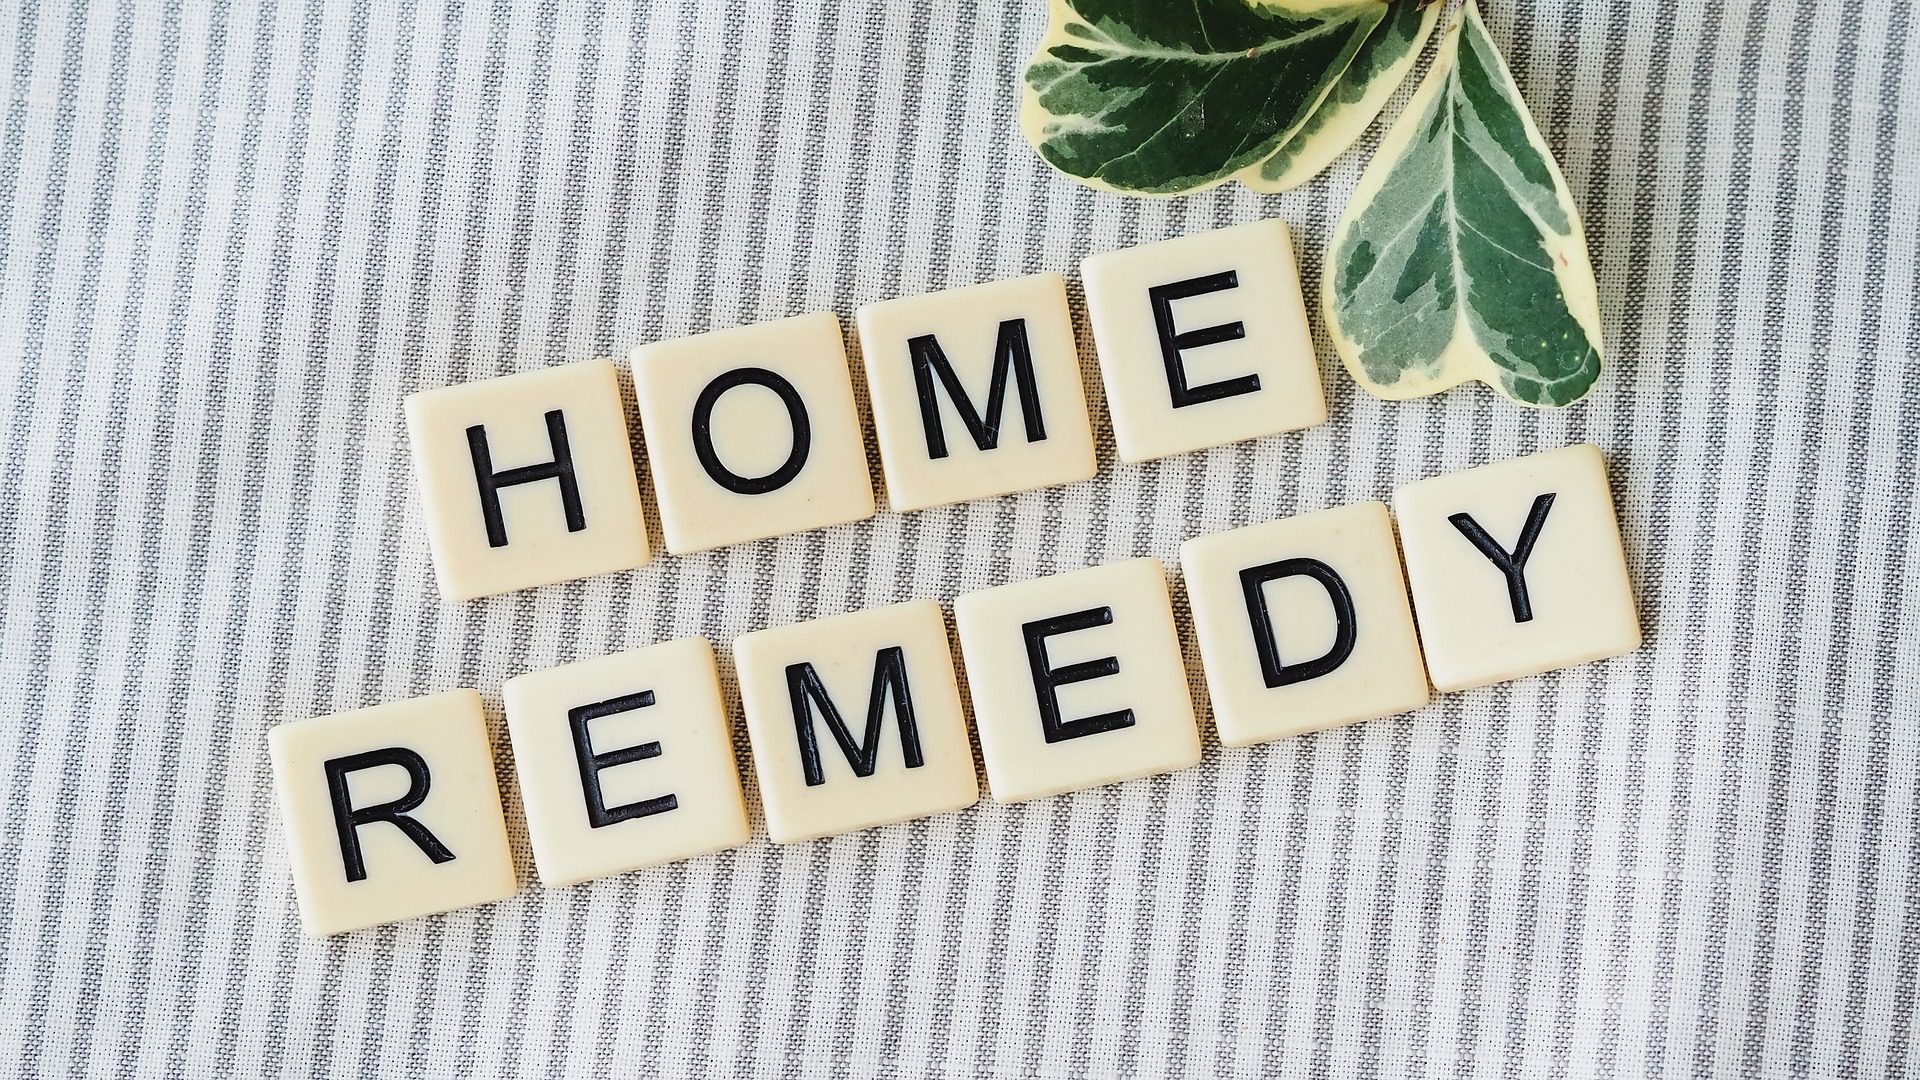 Home Remedies with Recipes: Natural Solutions for Common Ailments